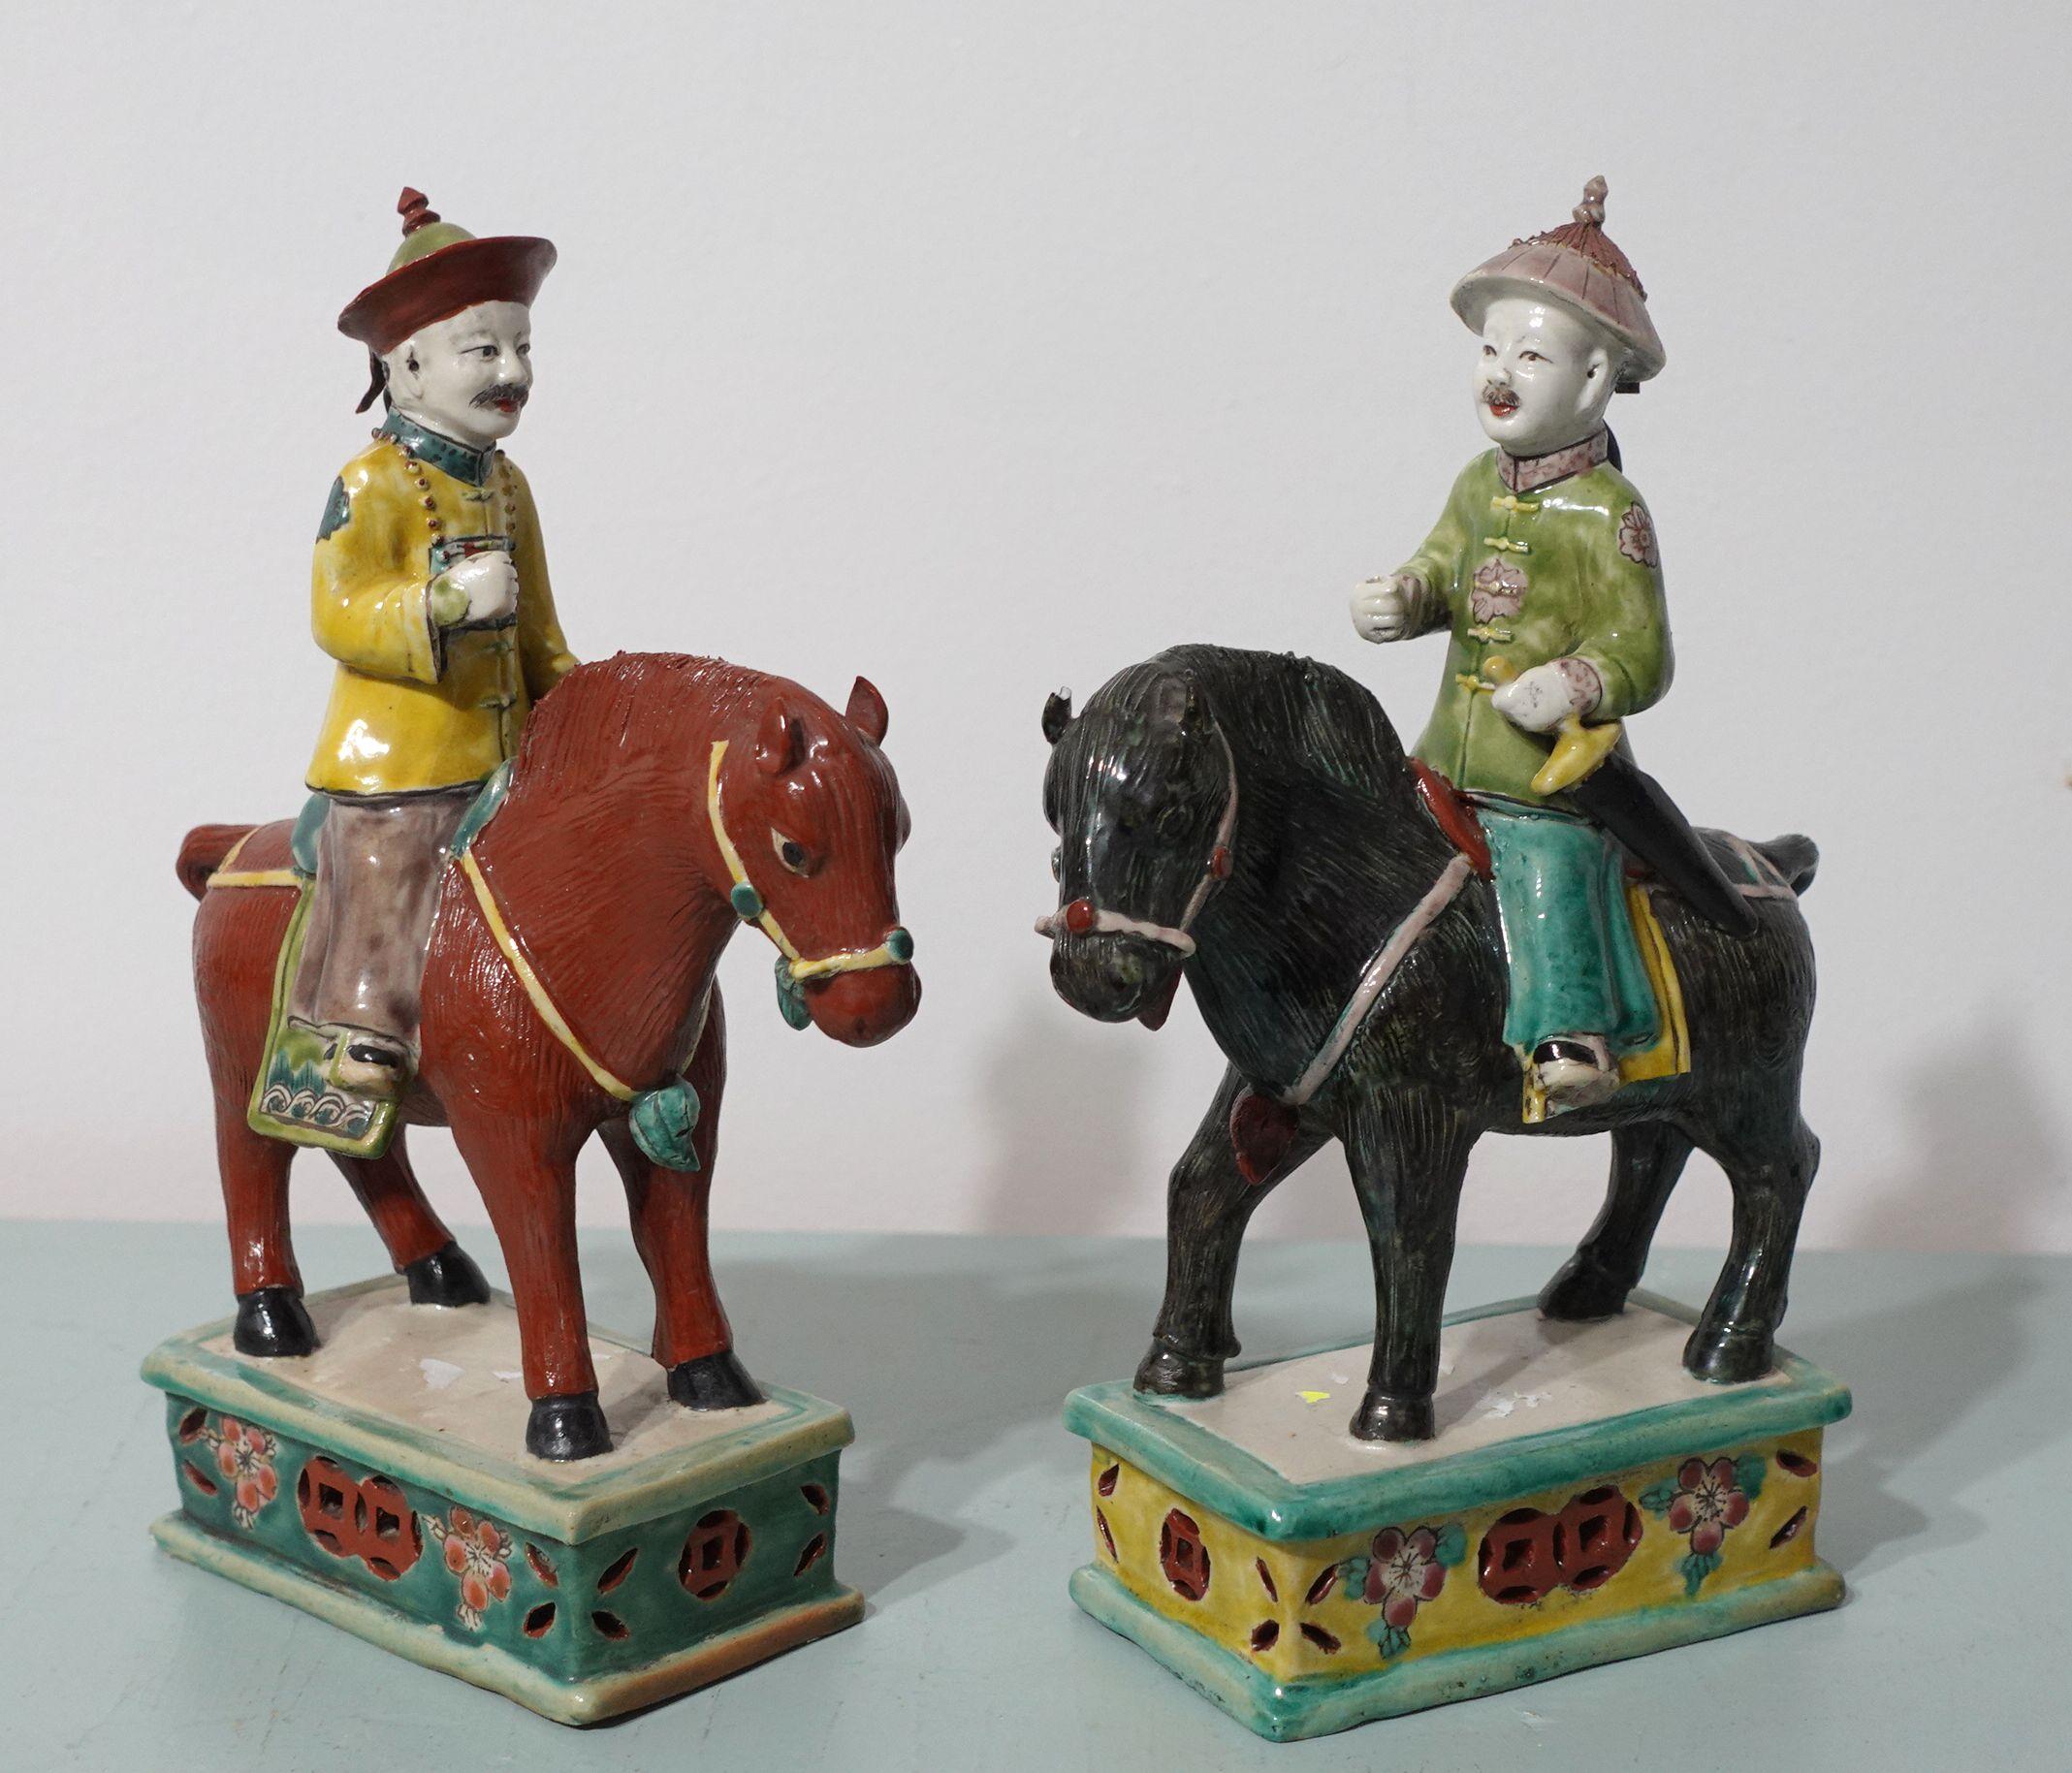 Antique Pair of Chinese Su Sanci Glazed Horse Figure and Men, from 19th Century.
One with a small missing piece, please see the last photo, the black horse on the back blanket below the man's booth.





